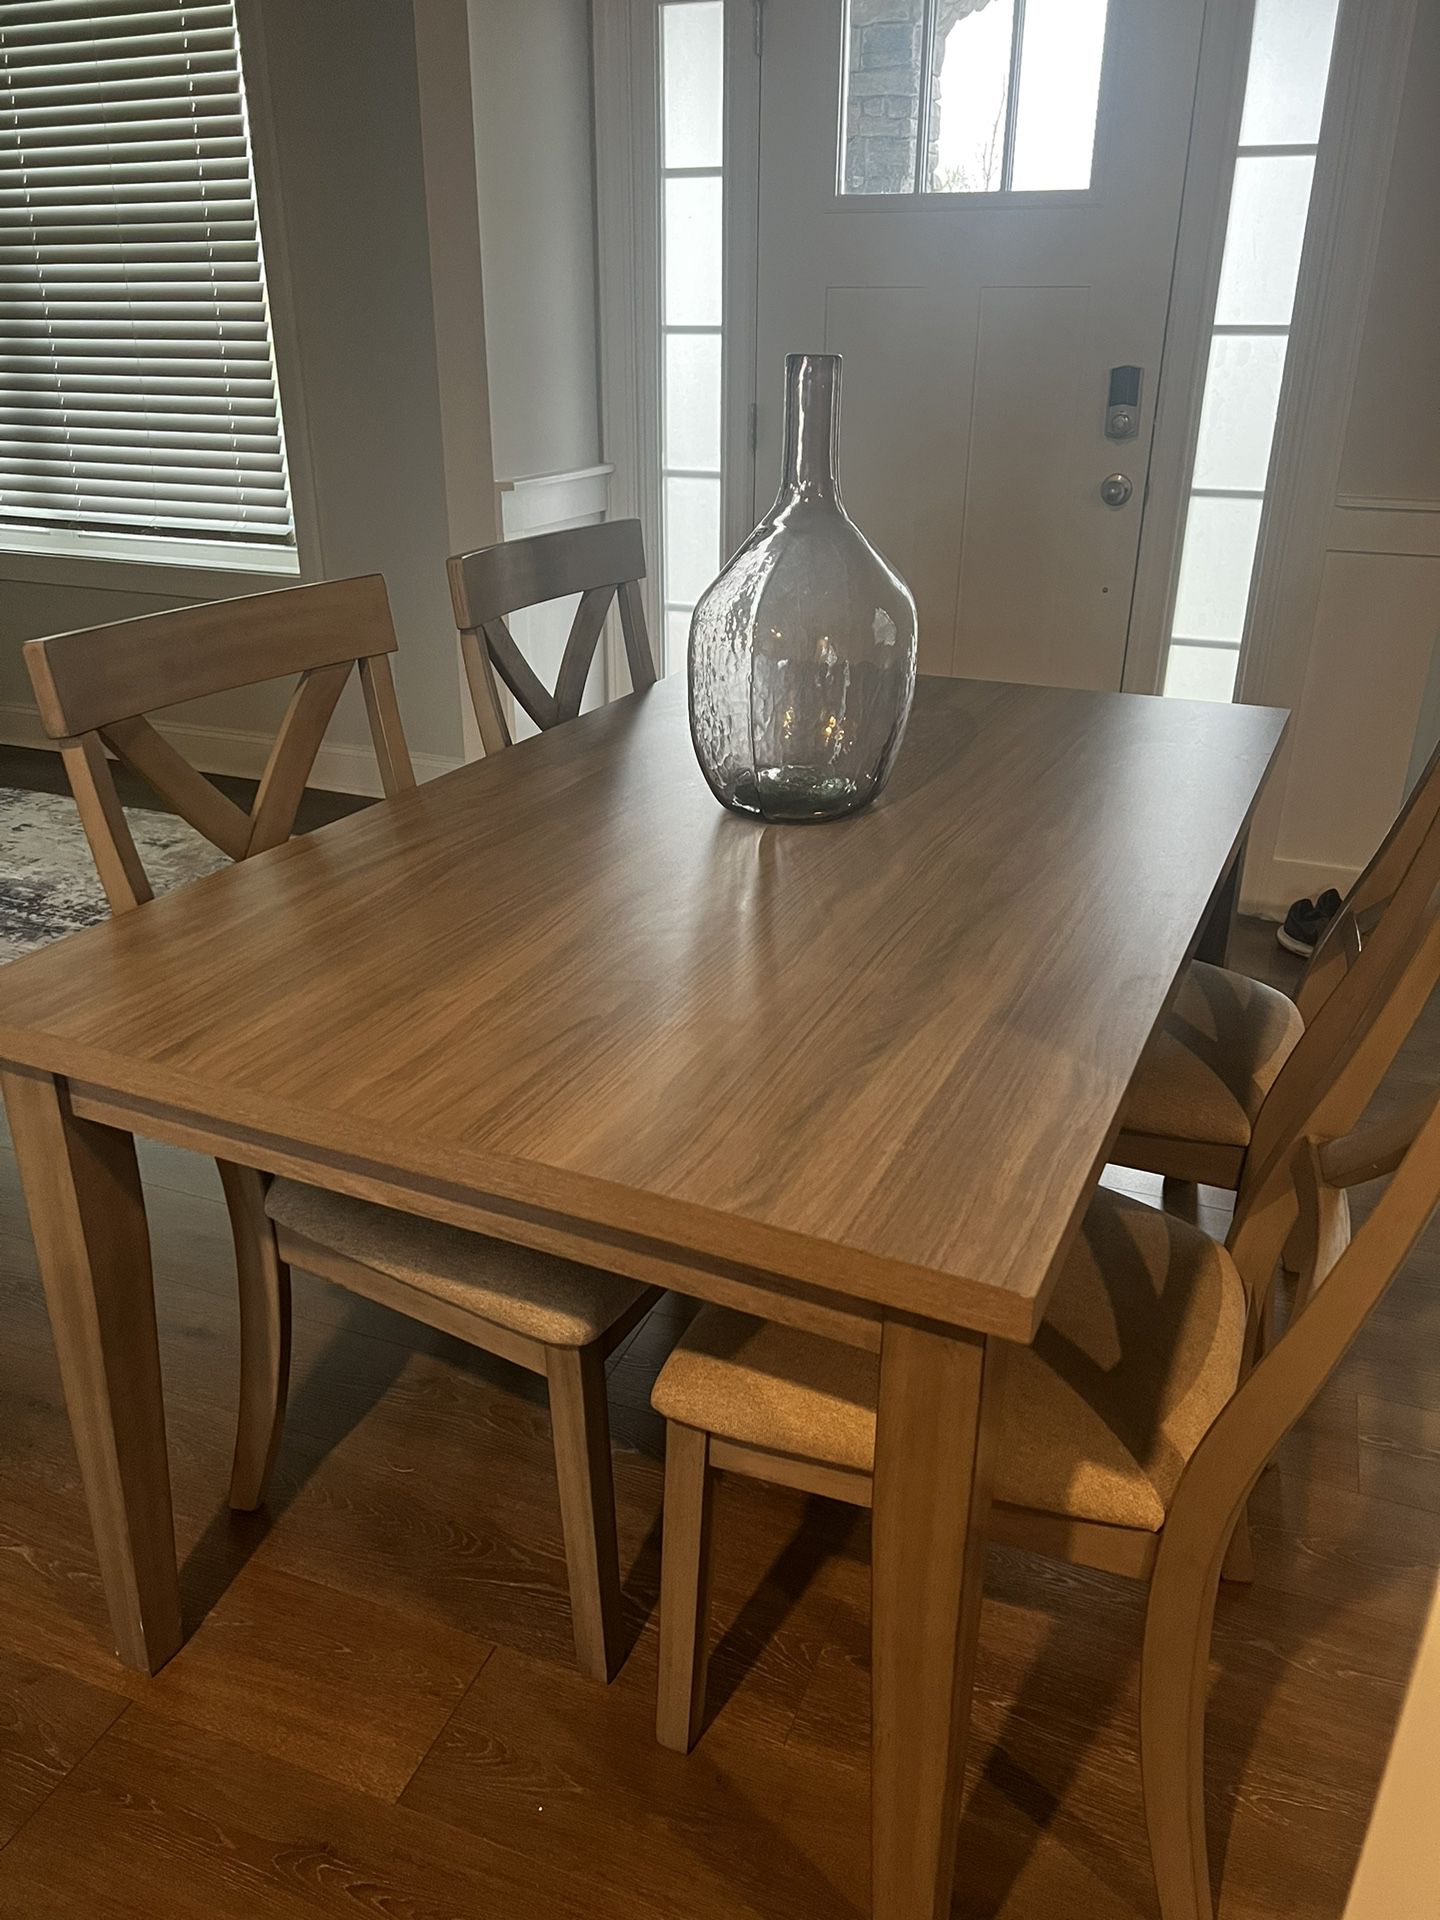 Dining Table With Four Chairs.